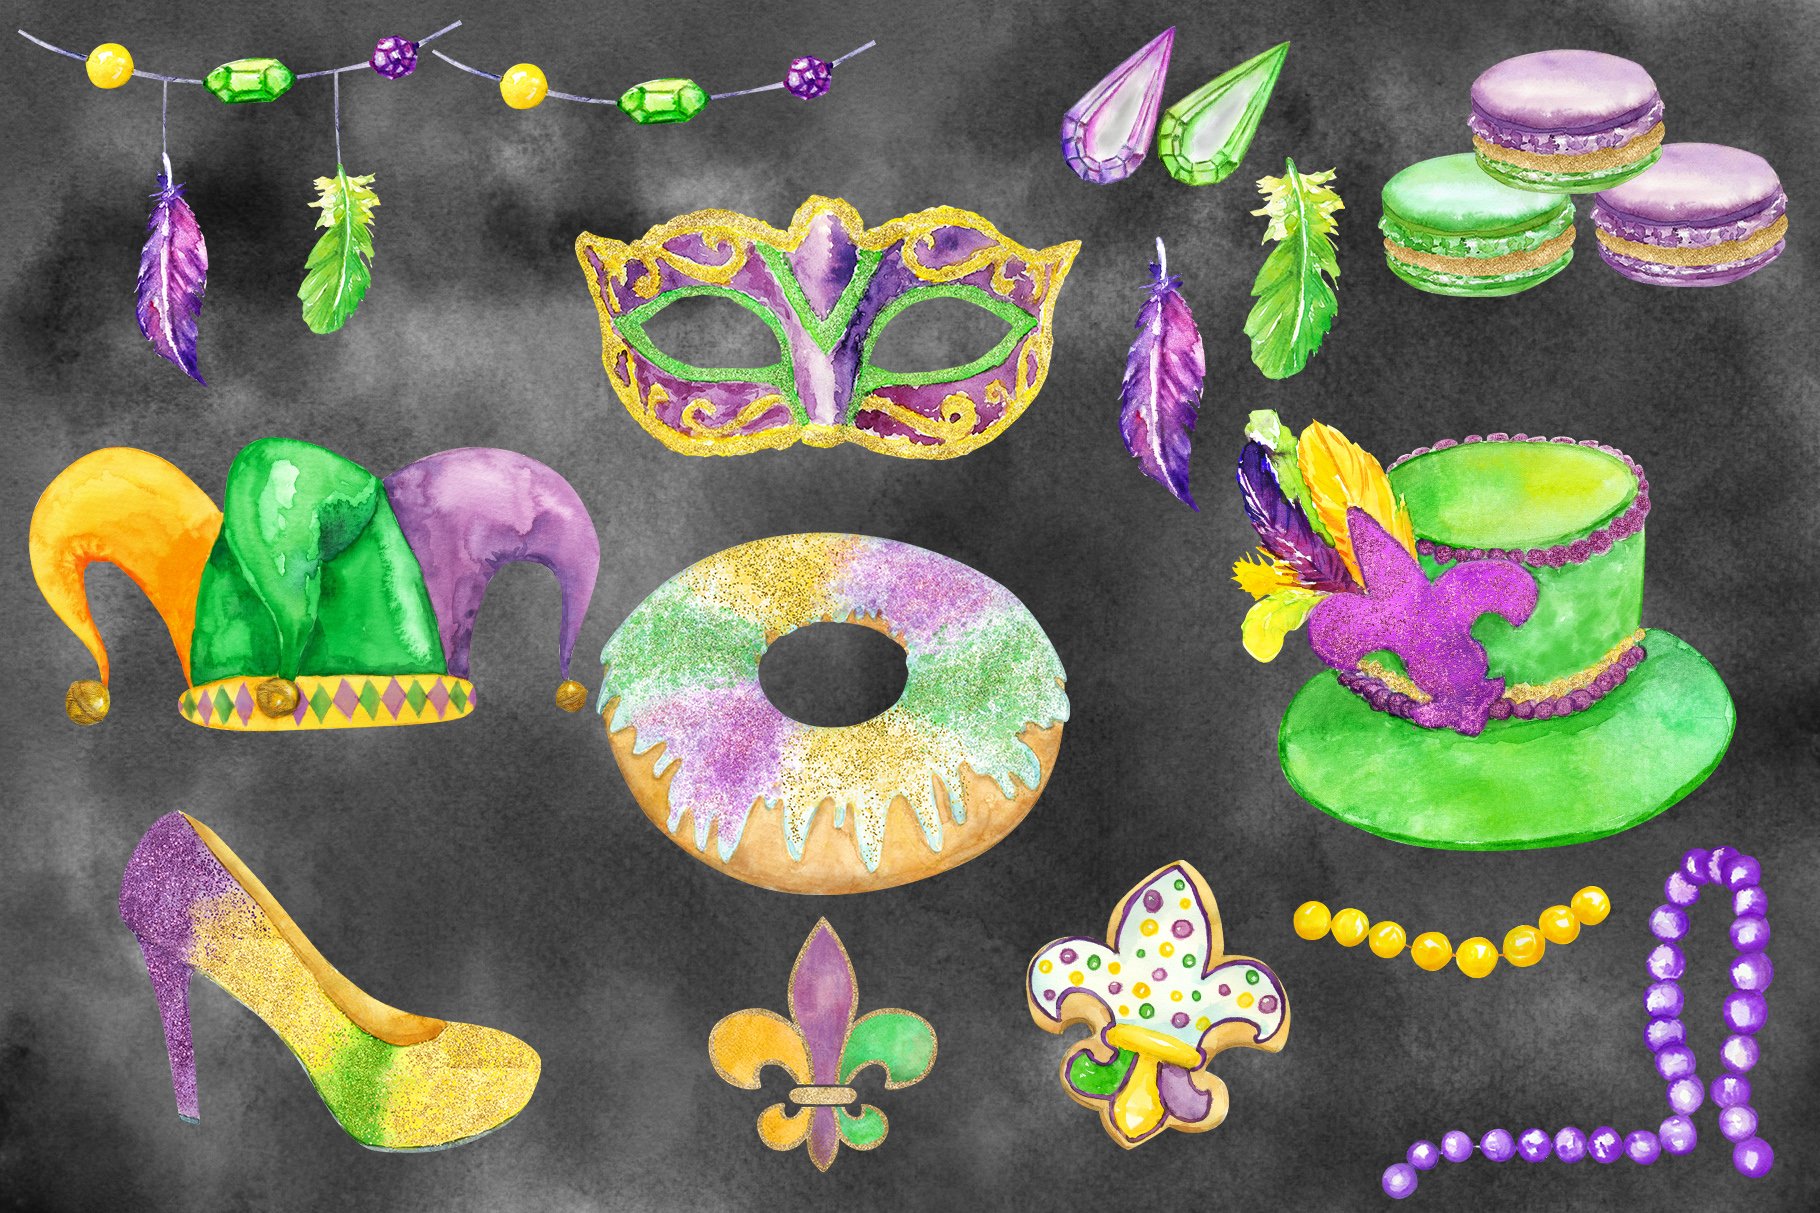 Black watercolor background with the colorful carnival items.